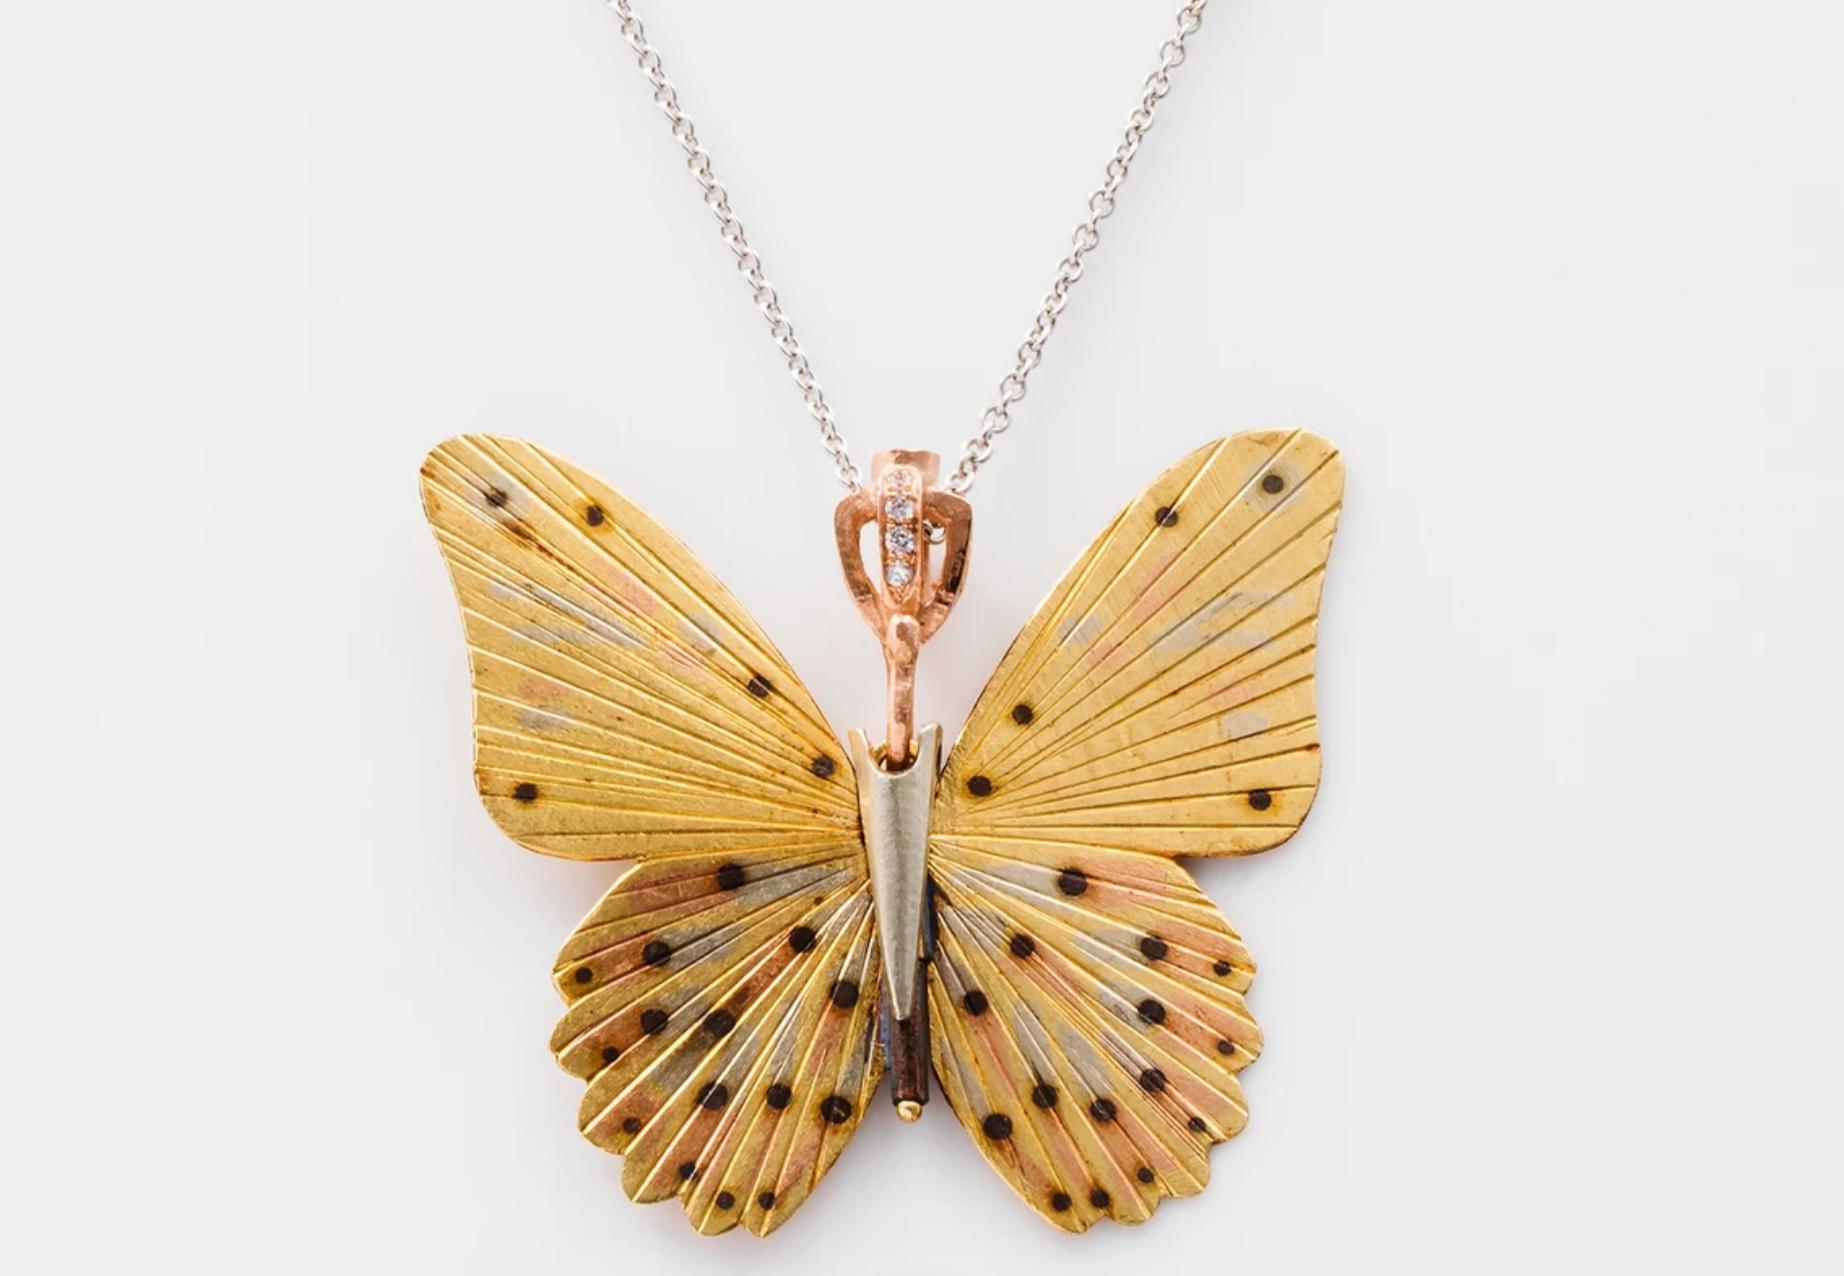 James Banks's signature butterfly necklace features a Large Troides Helena species Butterfly with a hinge at the center to allow movement of the wings, set in 18k Yellow Gold, 14k Rose Gold, 18k White Gold, Copper, and Sterling Silver inlay, hung on